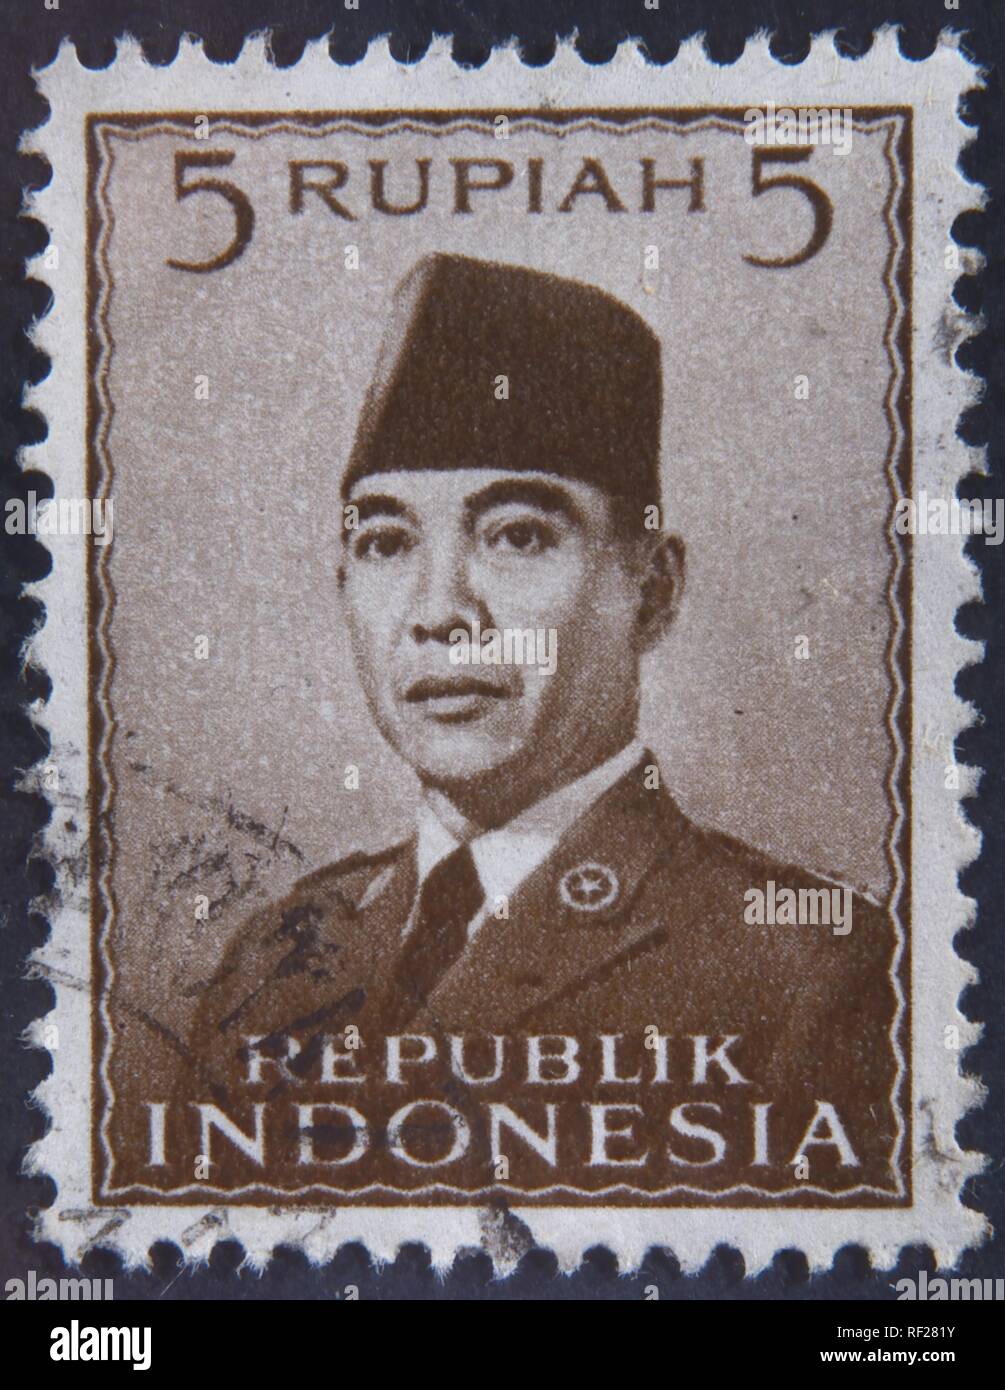 Sukarno, president of Indonesia, portrait on an Indonesian stamp, Sweden Stock Photo